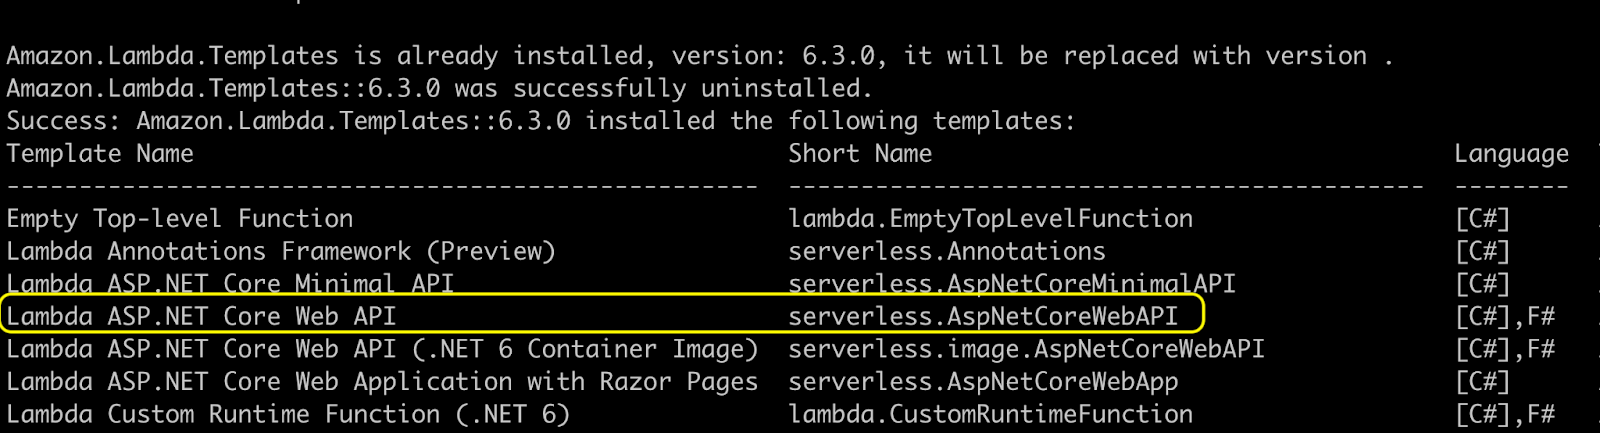 Terminal window showing Amazon.Lambda.Templates has been installed successfully